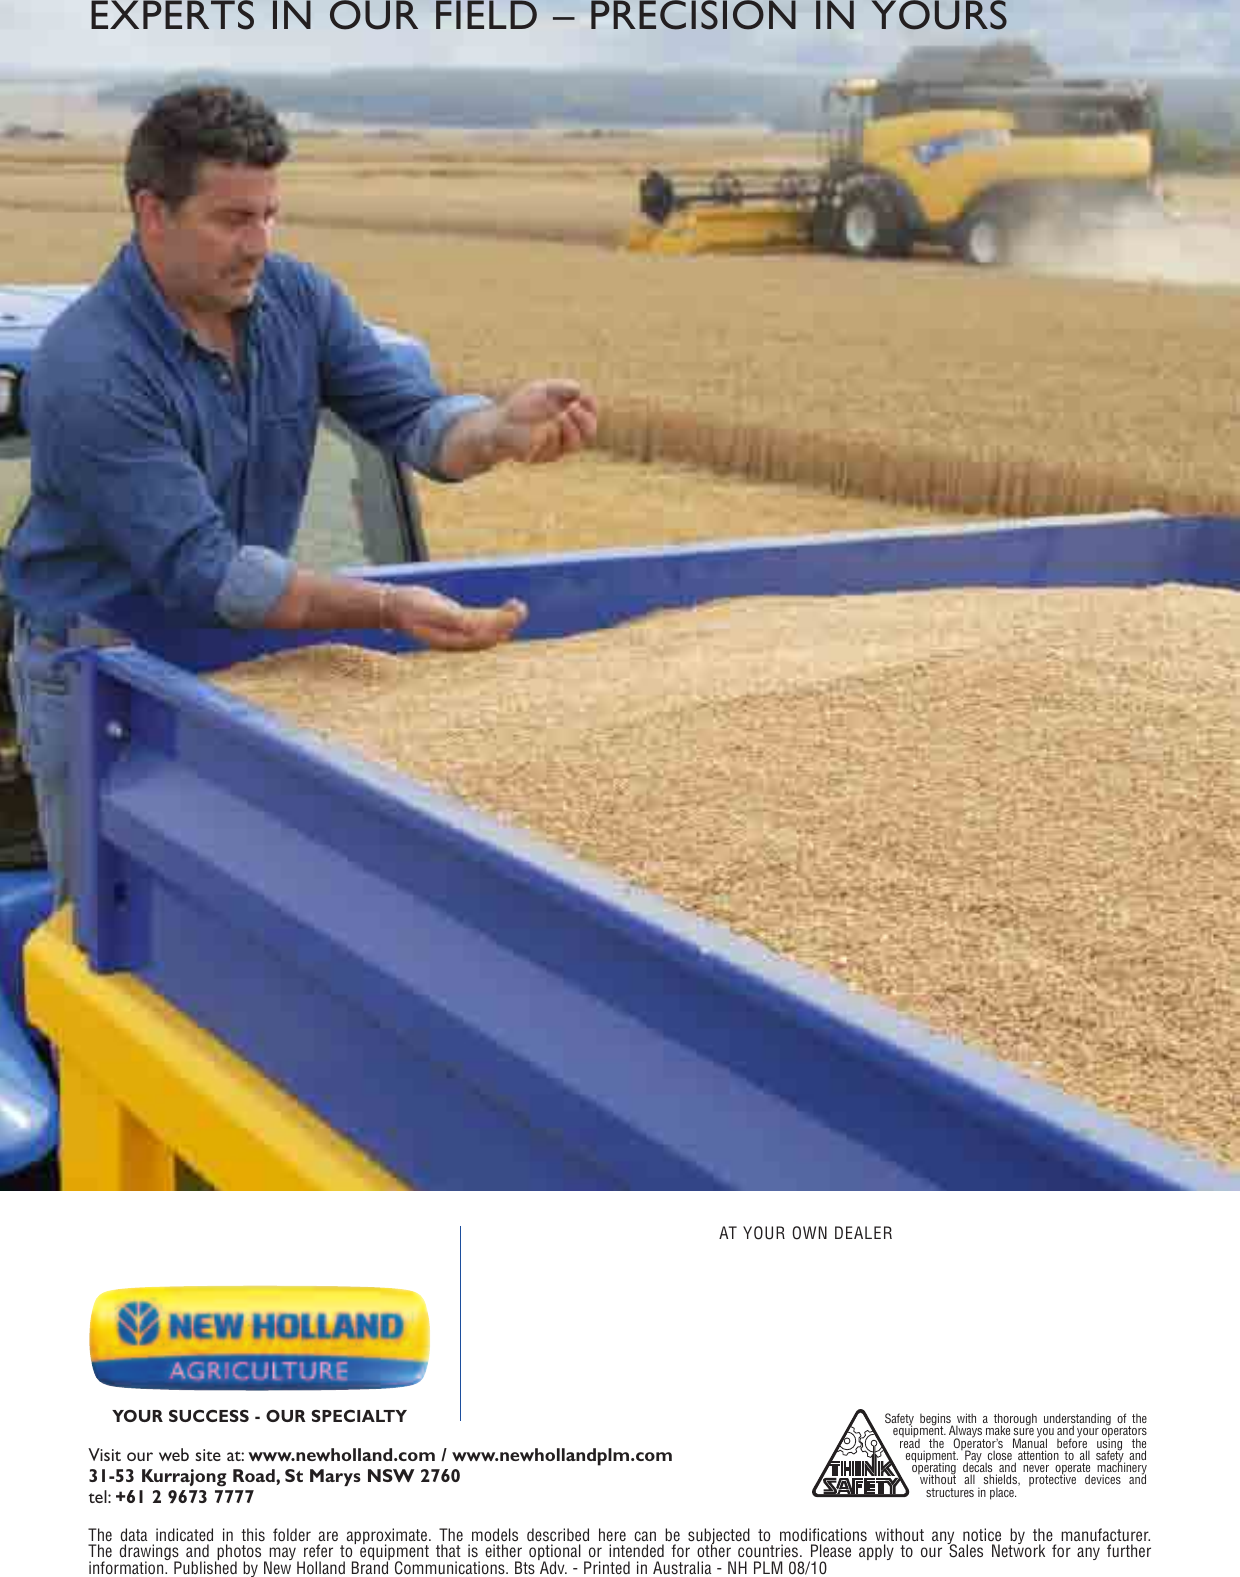 Page 11 of 11 - New-Holland New-Holland-Fm-1000-Users-Manual-  New-holland-fm-1000-users-manual